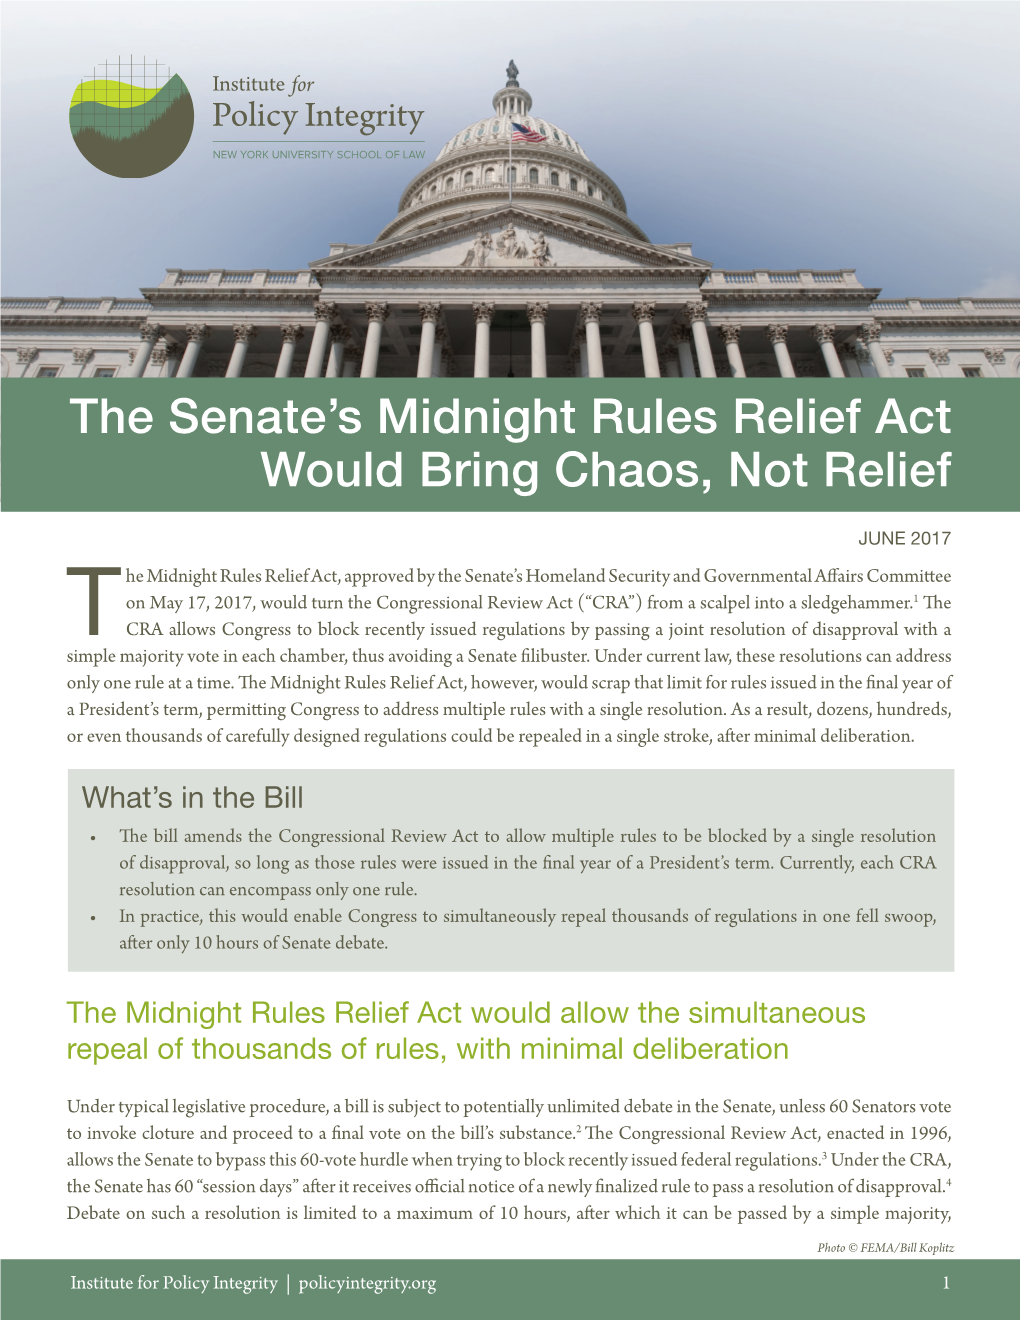 The Senate's Midnight Rules Relief Act Would Bring Chaos, Not Relief